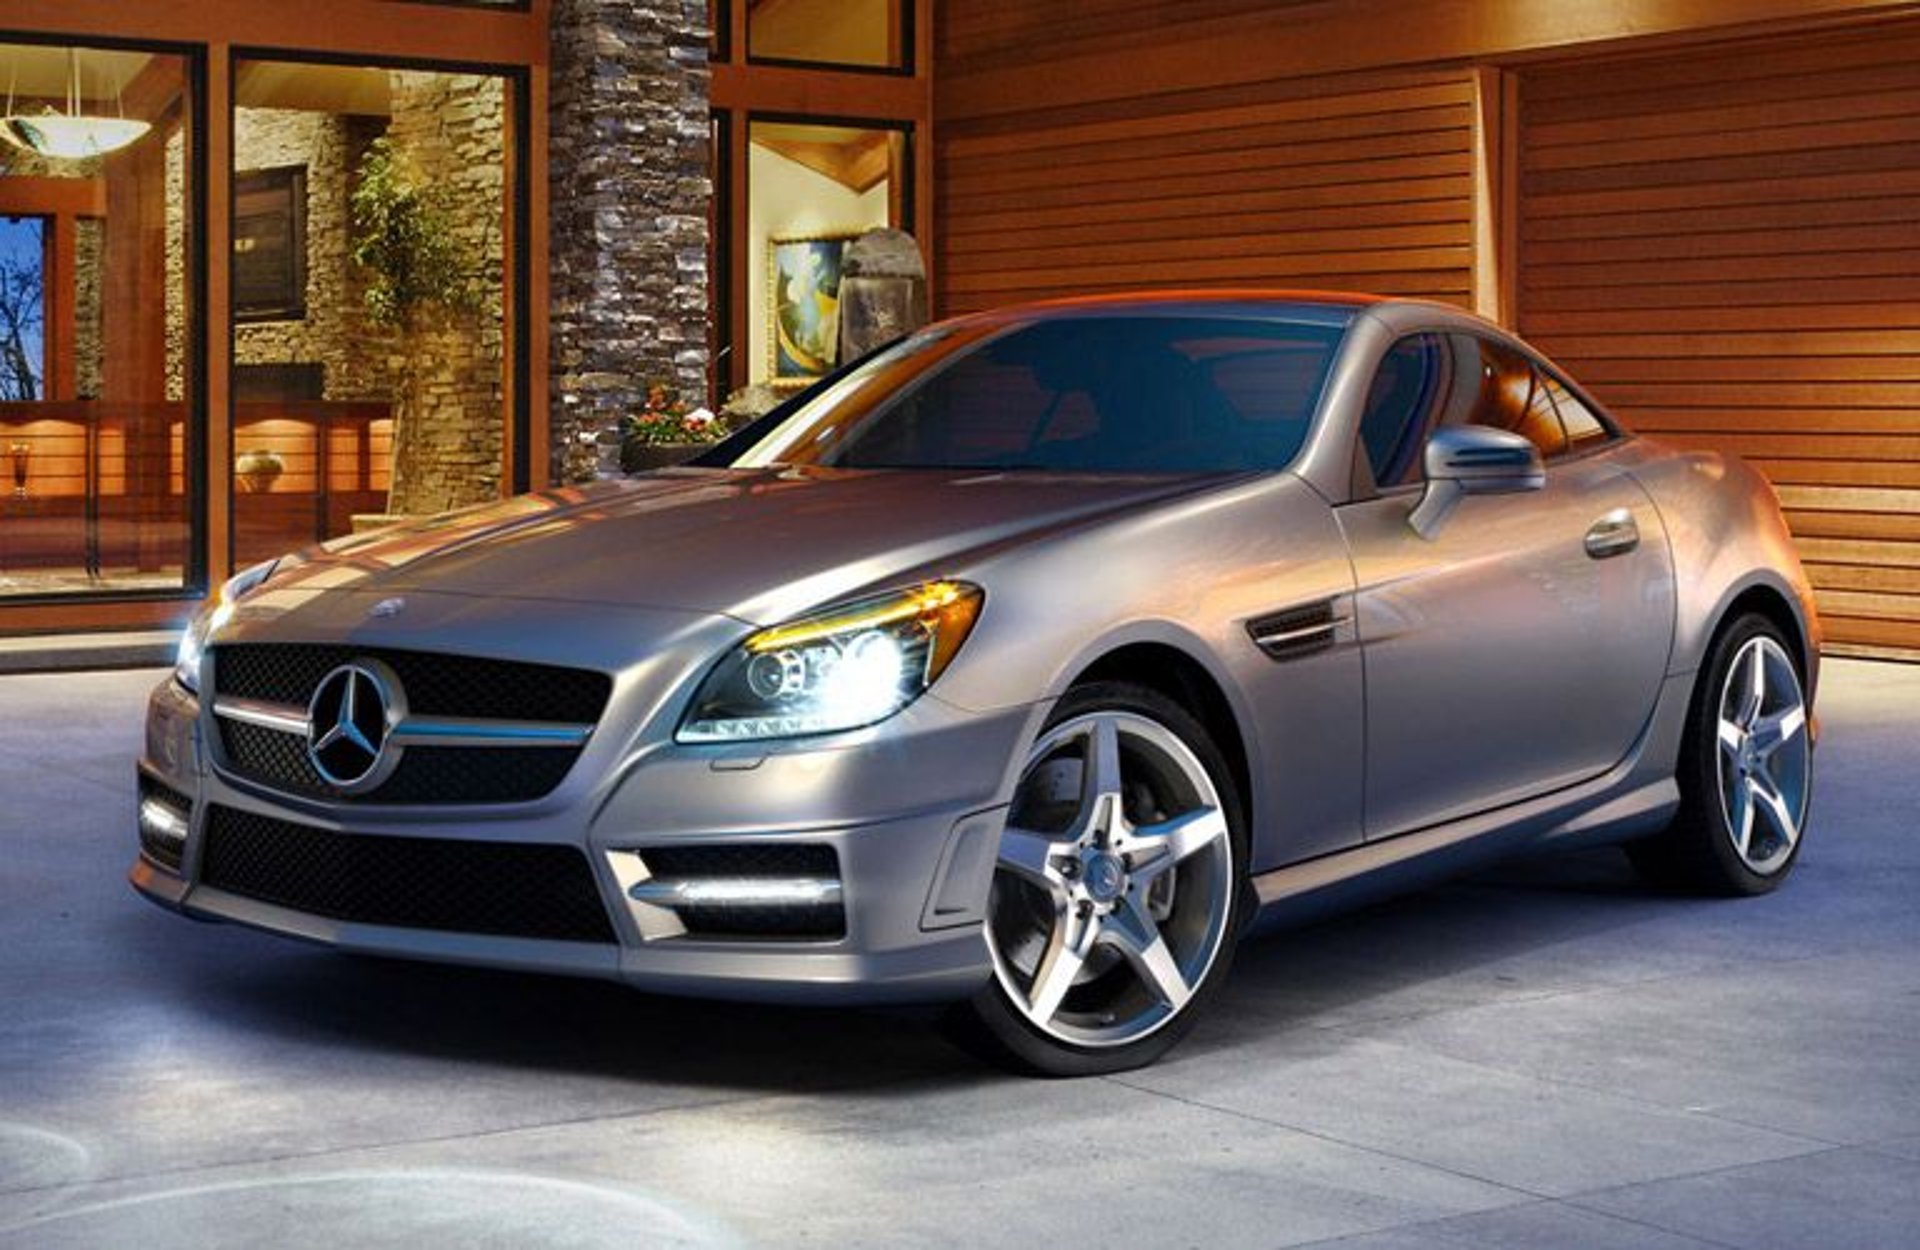 SLK Coupe Accessories